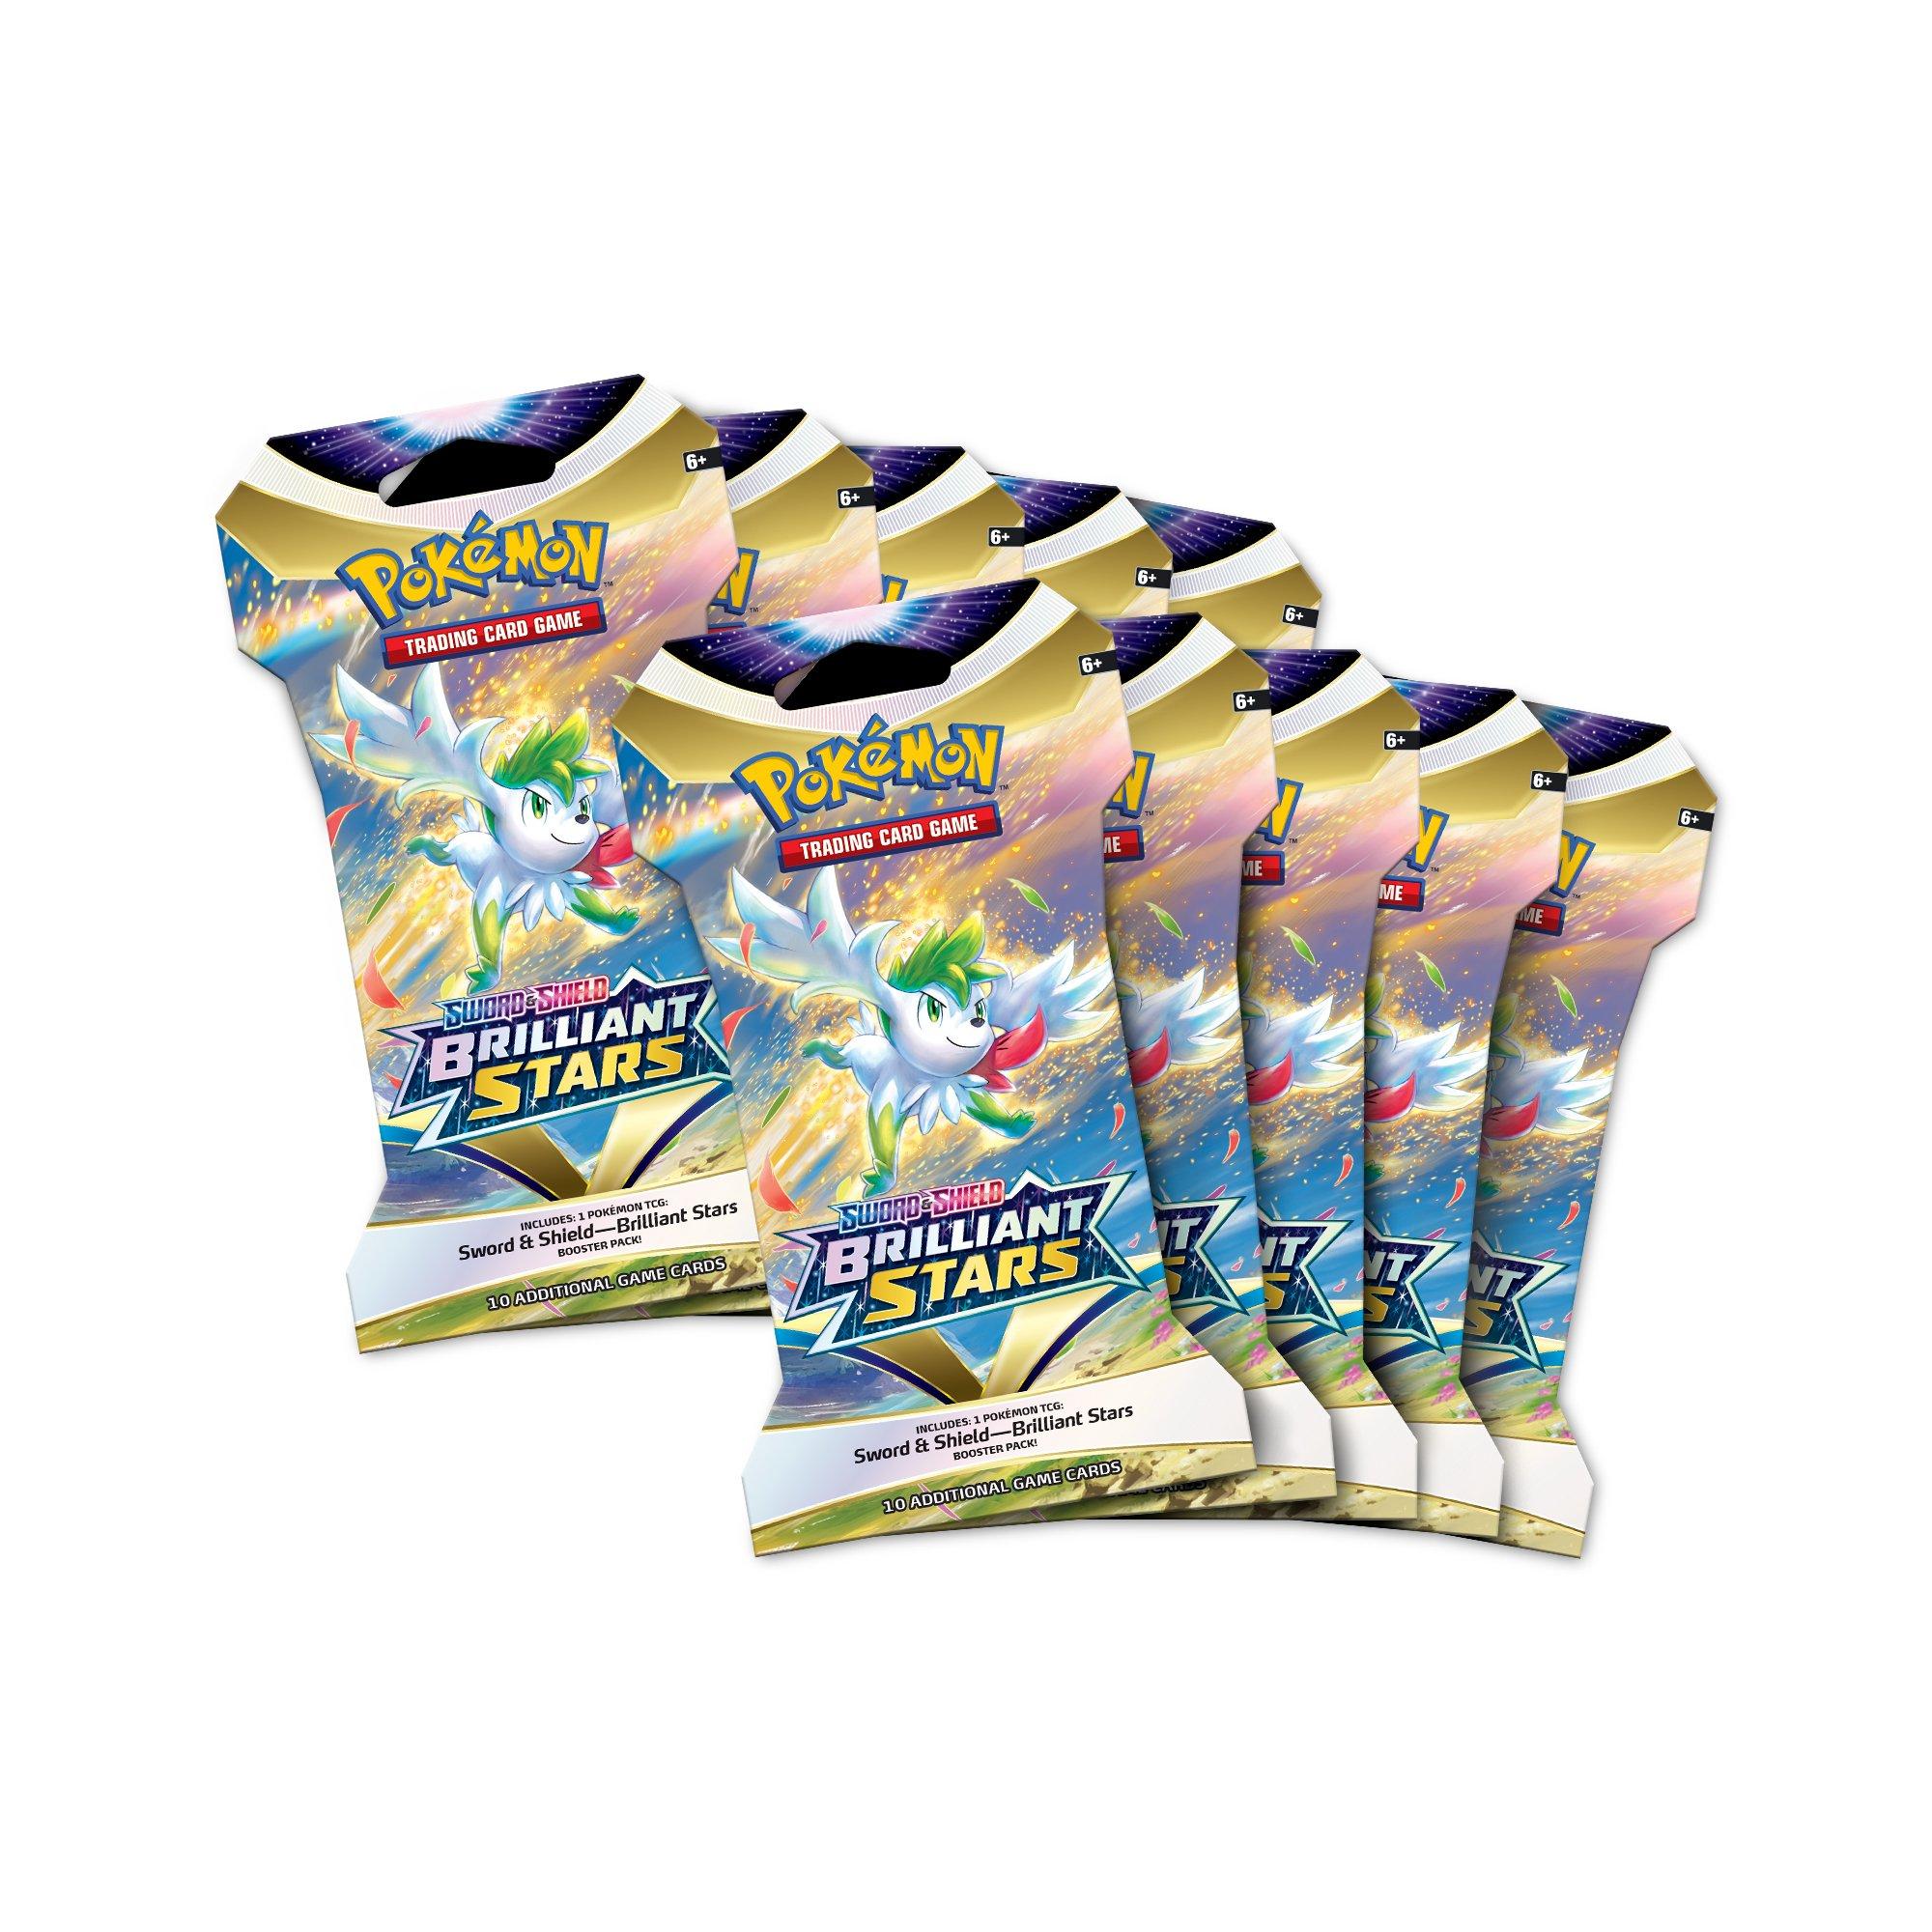 Pokemon Trading Card Game: Sword and Shield Brilliant Stars Sleeved 10 Booster Pack Bundle